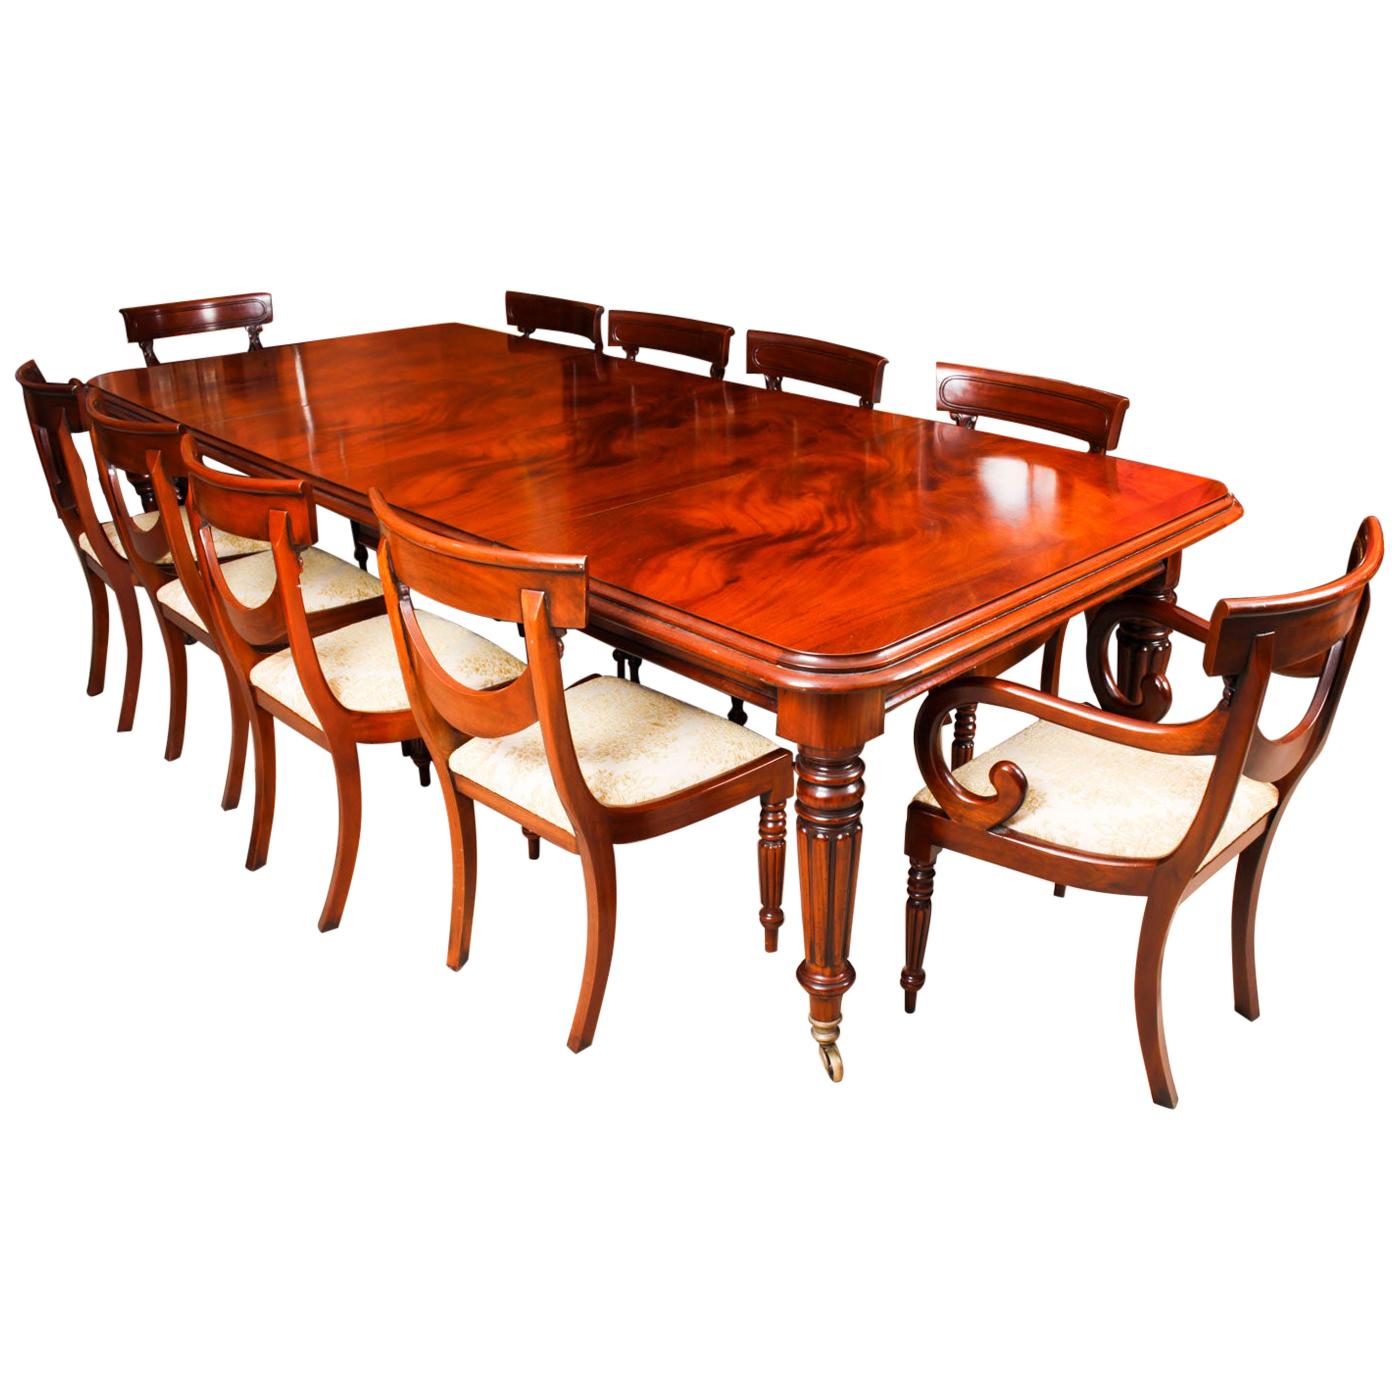 Vintage English Regency Revival Dining Table and 10 Chairs, 20th Century